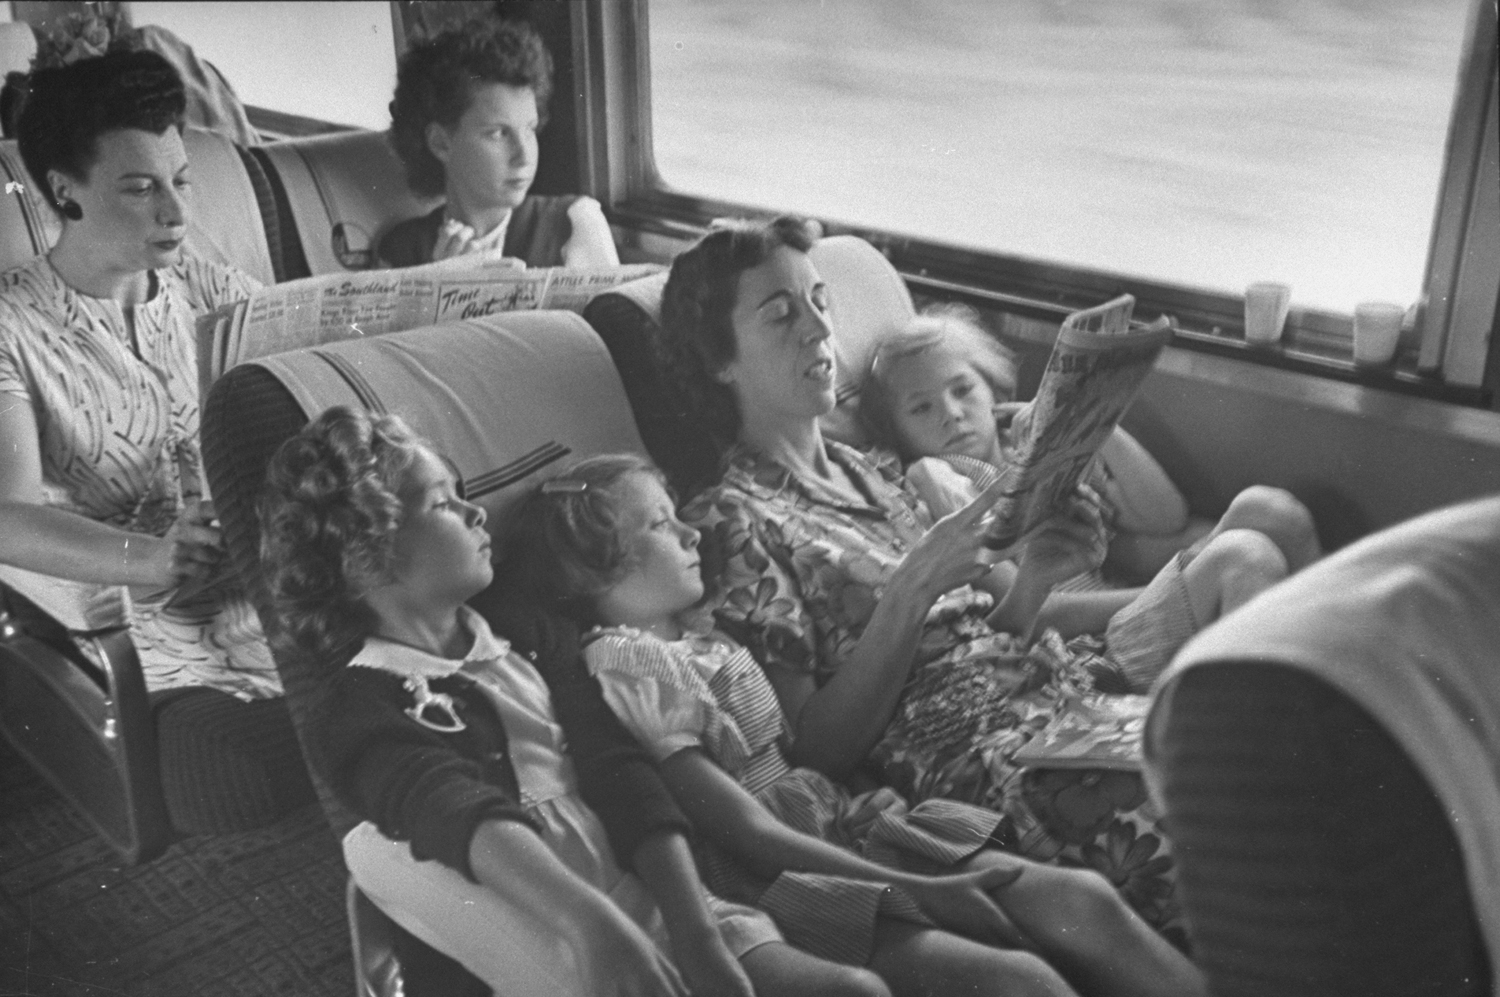 A mother reads her children the comics while traveling on the "El Capitan" train between Chicago and Los Angeles, 1945.